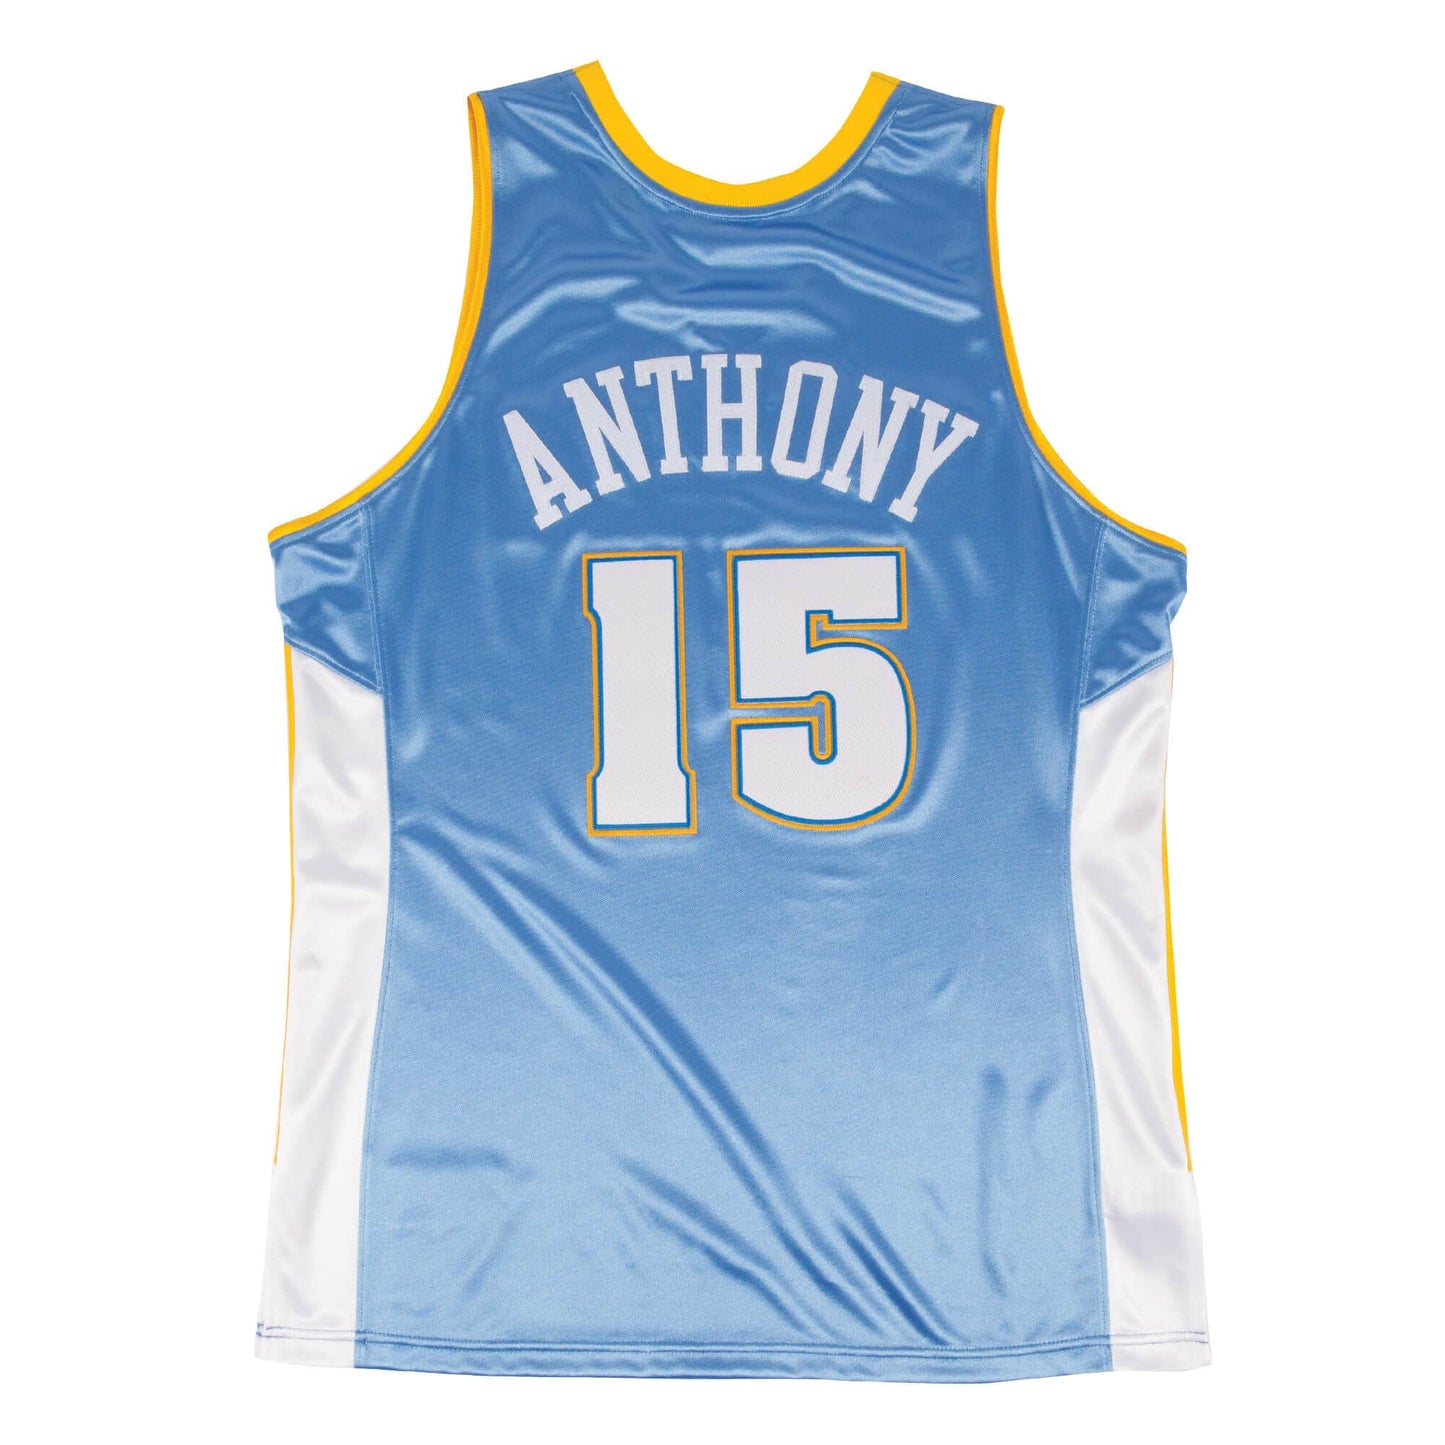 Authentic Jersey Denver Nuggets 2003-04 Carmelo Anthony